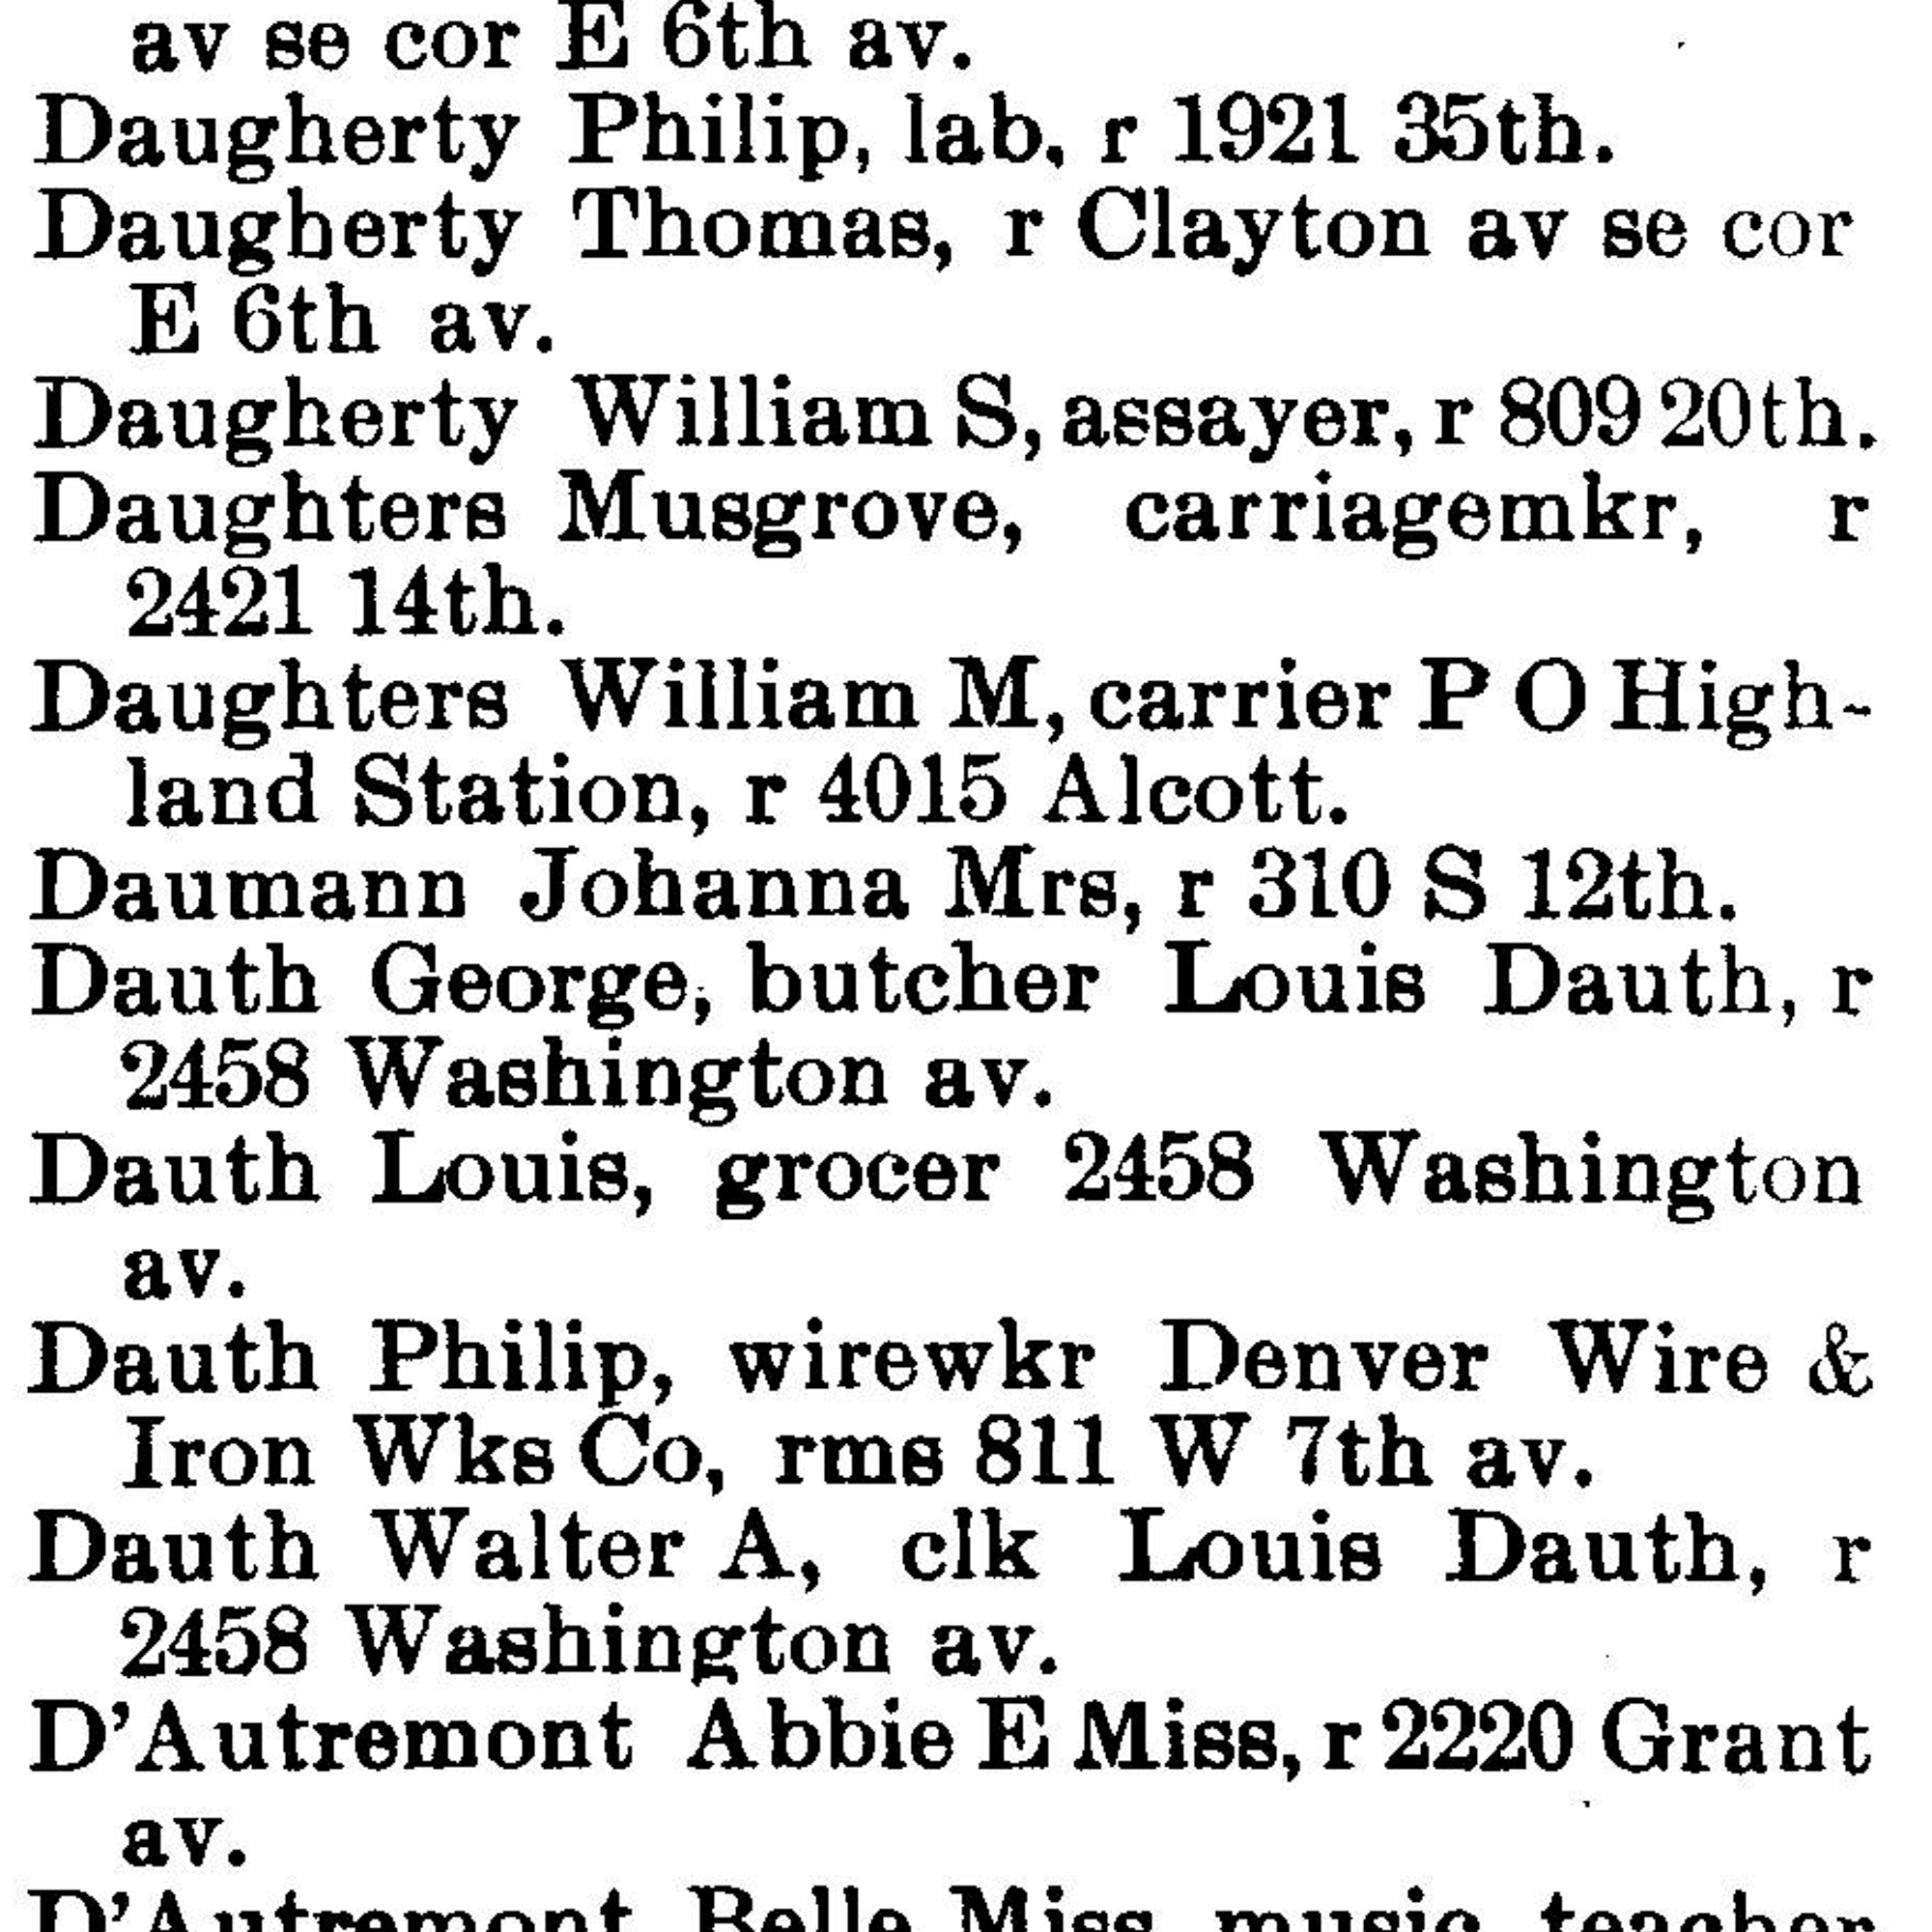 Dauth Family Archive - 1899 - Denver Directory - Entry for George, Louis, Philip, and Walter Dauth